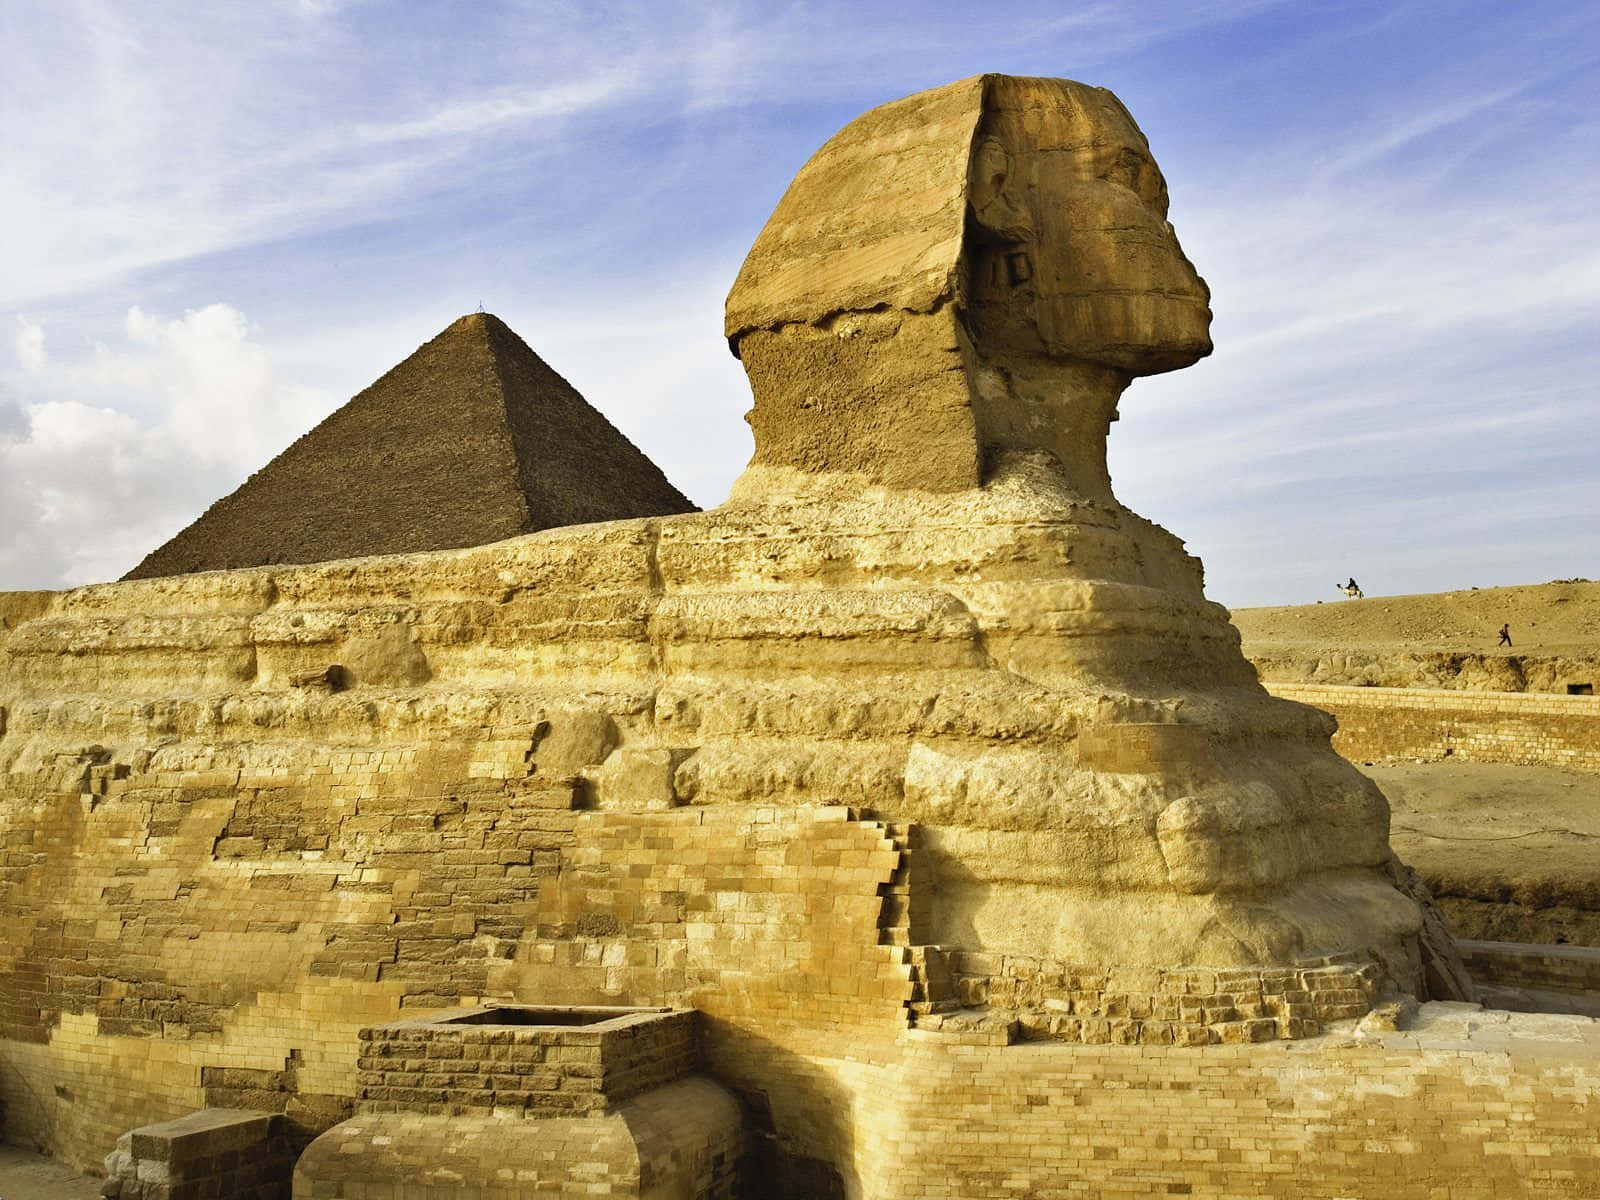 The Great Sphinx and Pyramids of Giza, Egypt